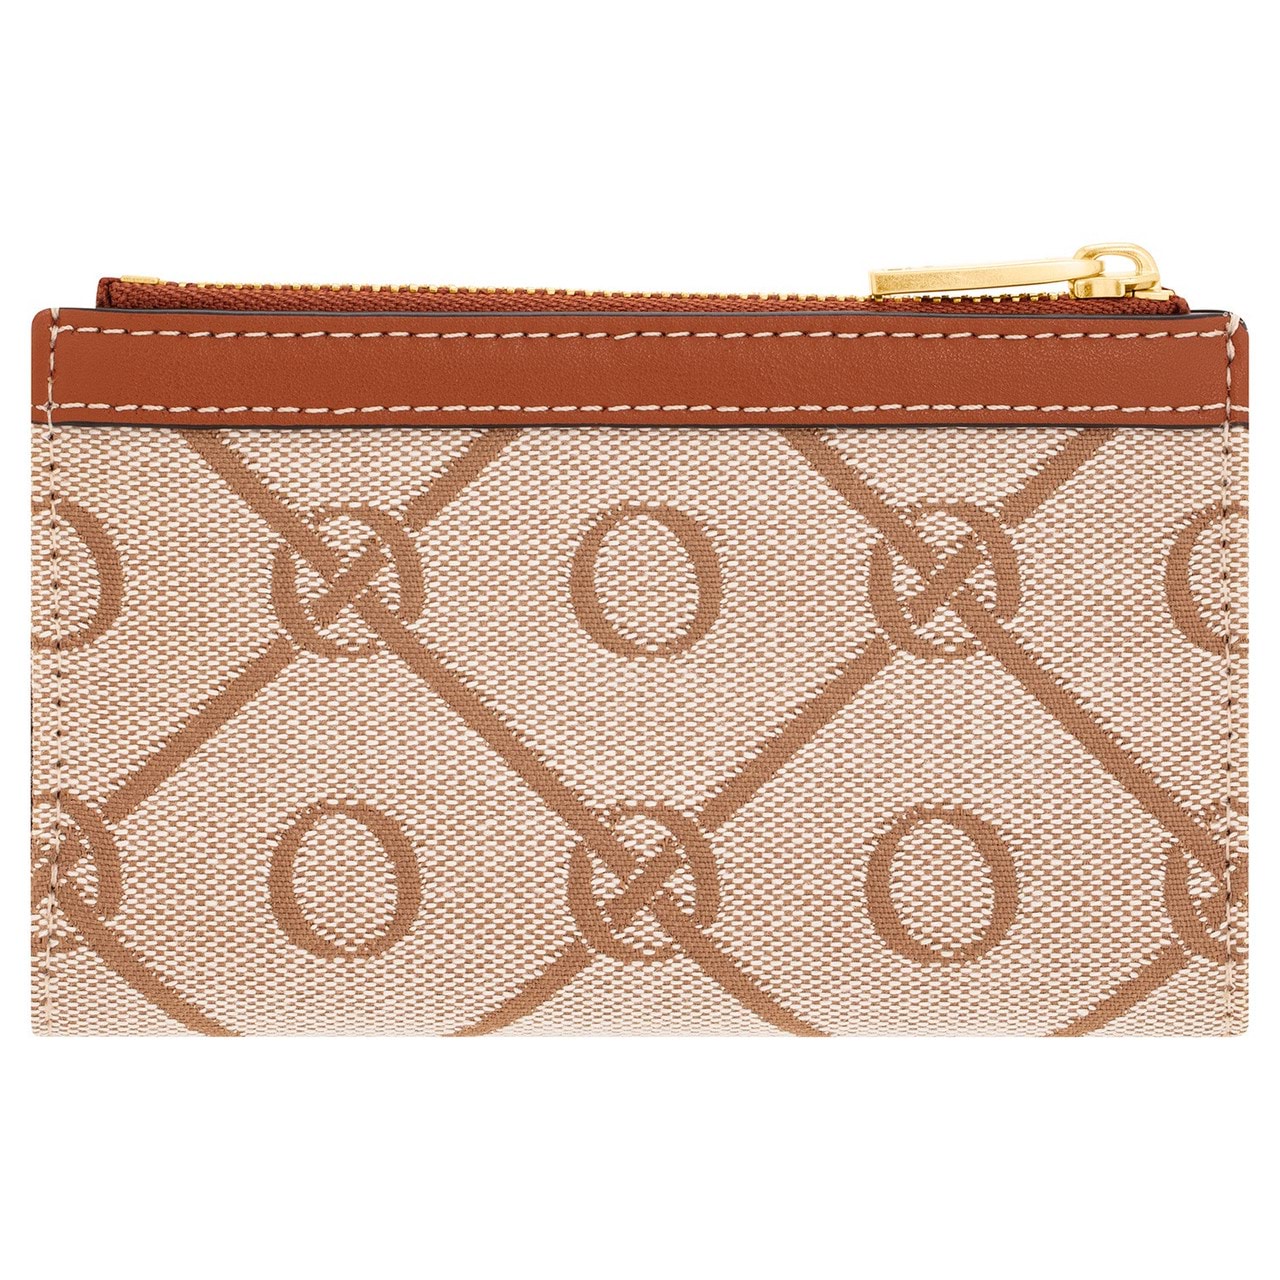 Zippy Wallet Other Monogram Canvas - Wallets and Small Leather